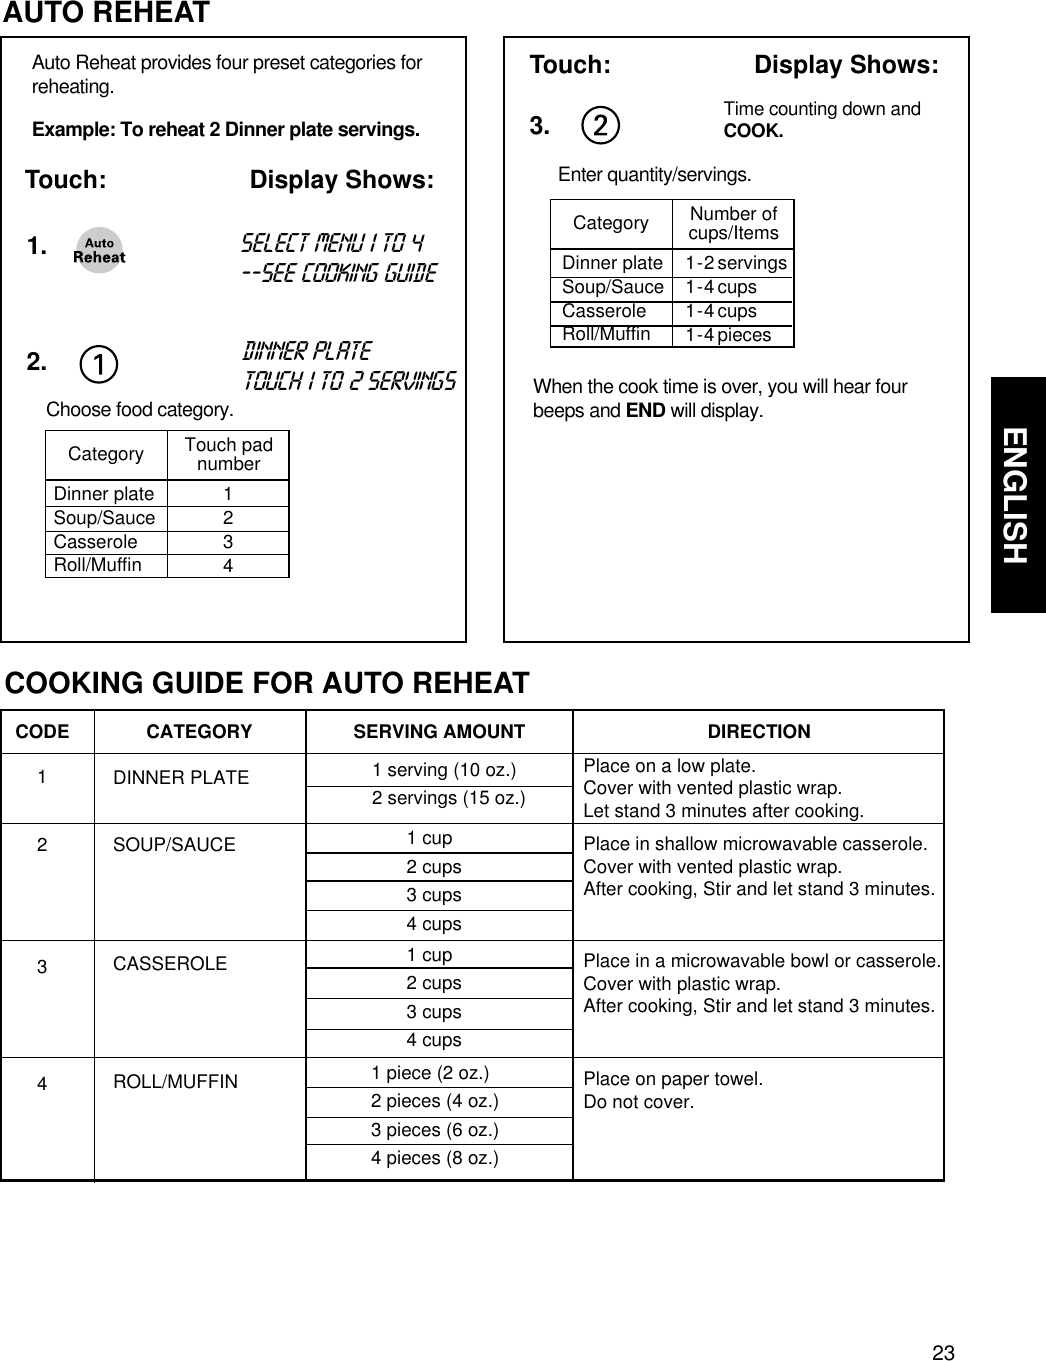 23ENGLISHUSING YOUR MICROWAVE OVEN  AUTO REHEATCOOKING GUIDE FOR AUTO REHEAT1.2.Auto Reheat provides four preset categories forreheating.Example: To reheat 2 Dinner plate servings.Touch: Display Shows:Touch: Display Shows:select menu 1 to 4--see cooking guidedinner platetouch 1 to 2 servingsChoose food category.3.Enter quantity/servings.Time counting down andCOOK.When the cook time is over, you will hear fourbeeps and END will display.CategoryDinner plateSoup/SauceCasseroleRoll/MuffinTouch padnumber1 234CategoryDinner plateSoup/SauceCasseroleRoll/MuffinNumber ofcups/Items1 - 2 servings1 - 4 cups1 - 4 cups1 - 4 piecesCATEGORYCODE1234DINNER PLATESOUP/SAUCECASSEROLEROLL/MUFFINPlace on a low plate. Cover with vented plastic wrap. Let stand 3 minutes after cooking.Place in shallow microwavable casserole.Cover with vented plastic wrap. After cooking, Stir and let stand 3 minutes.Place in a microwavable bowl or casserole.Cover with plastic wrap.After cooking, Stir and let stand 3 minutes.Place on paper towel. Do not cover.1 serving (10 oz.)2 servings (15 oz.)1 cup 2 cups 3 cups 4 cups 1 cup 2 cups 3 cups 4 cups 1 piece (2 oz.)2 pieces (4 oz.)3 pieces (6 oz.)4 pieces (8 oz.)SERVING AMOUNT DIRECTION